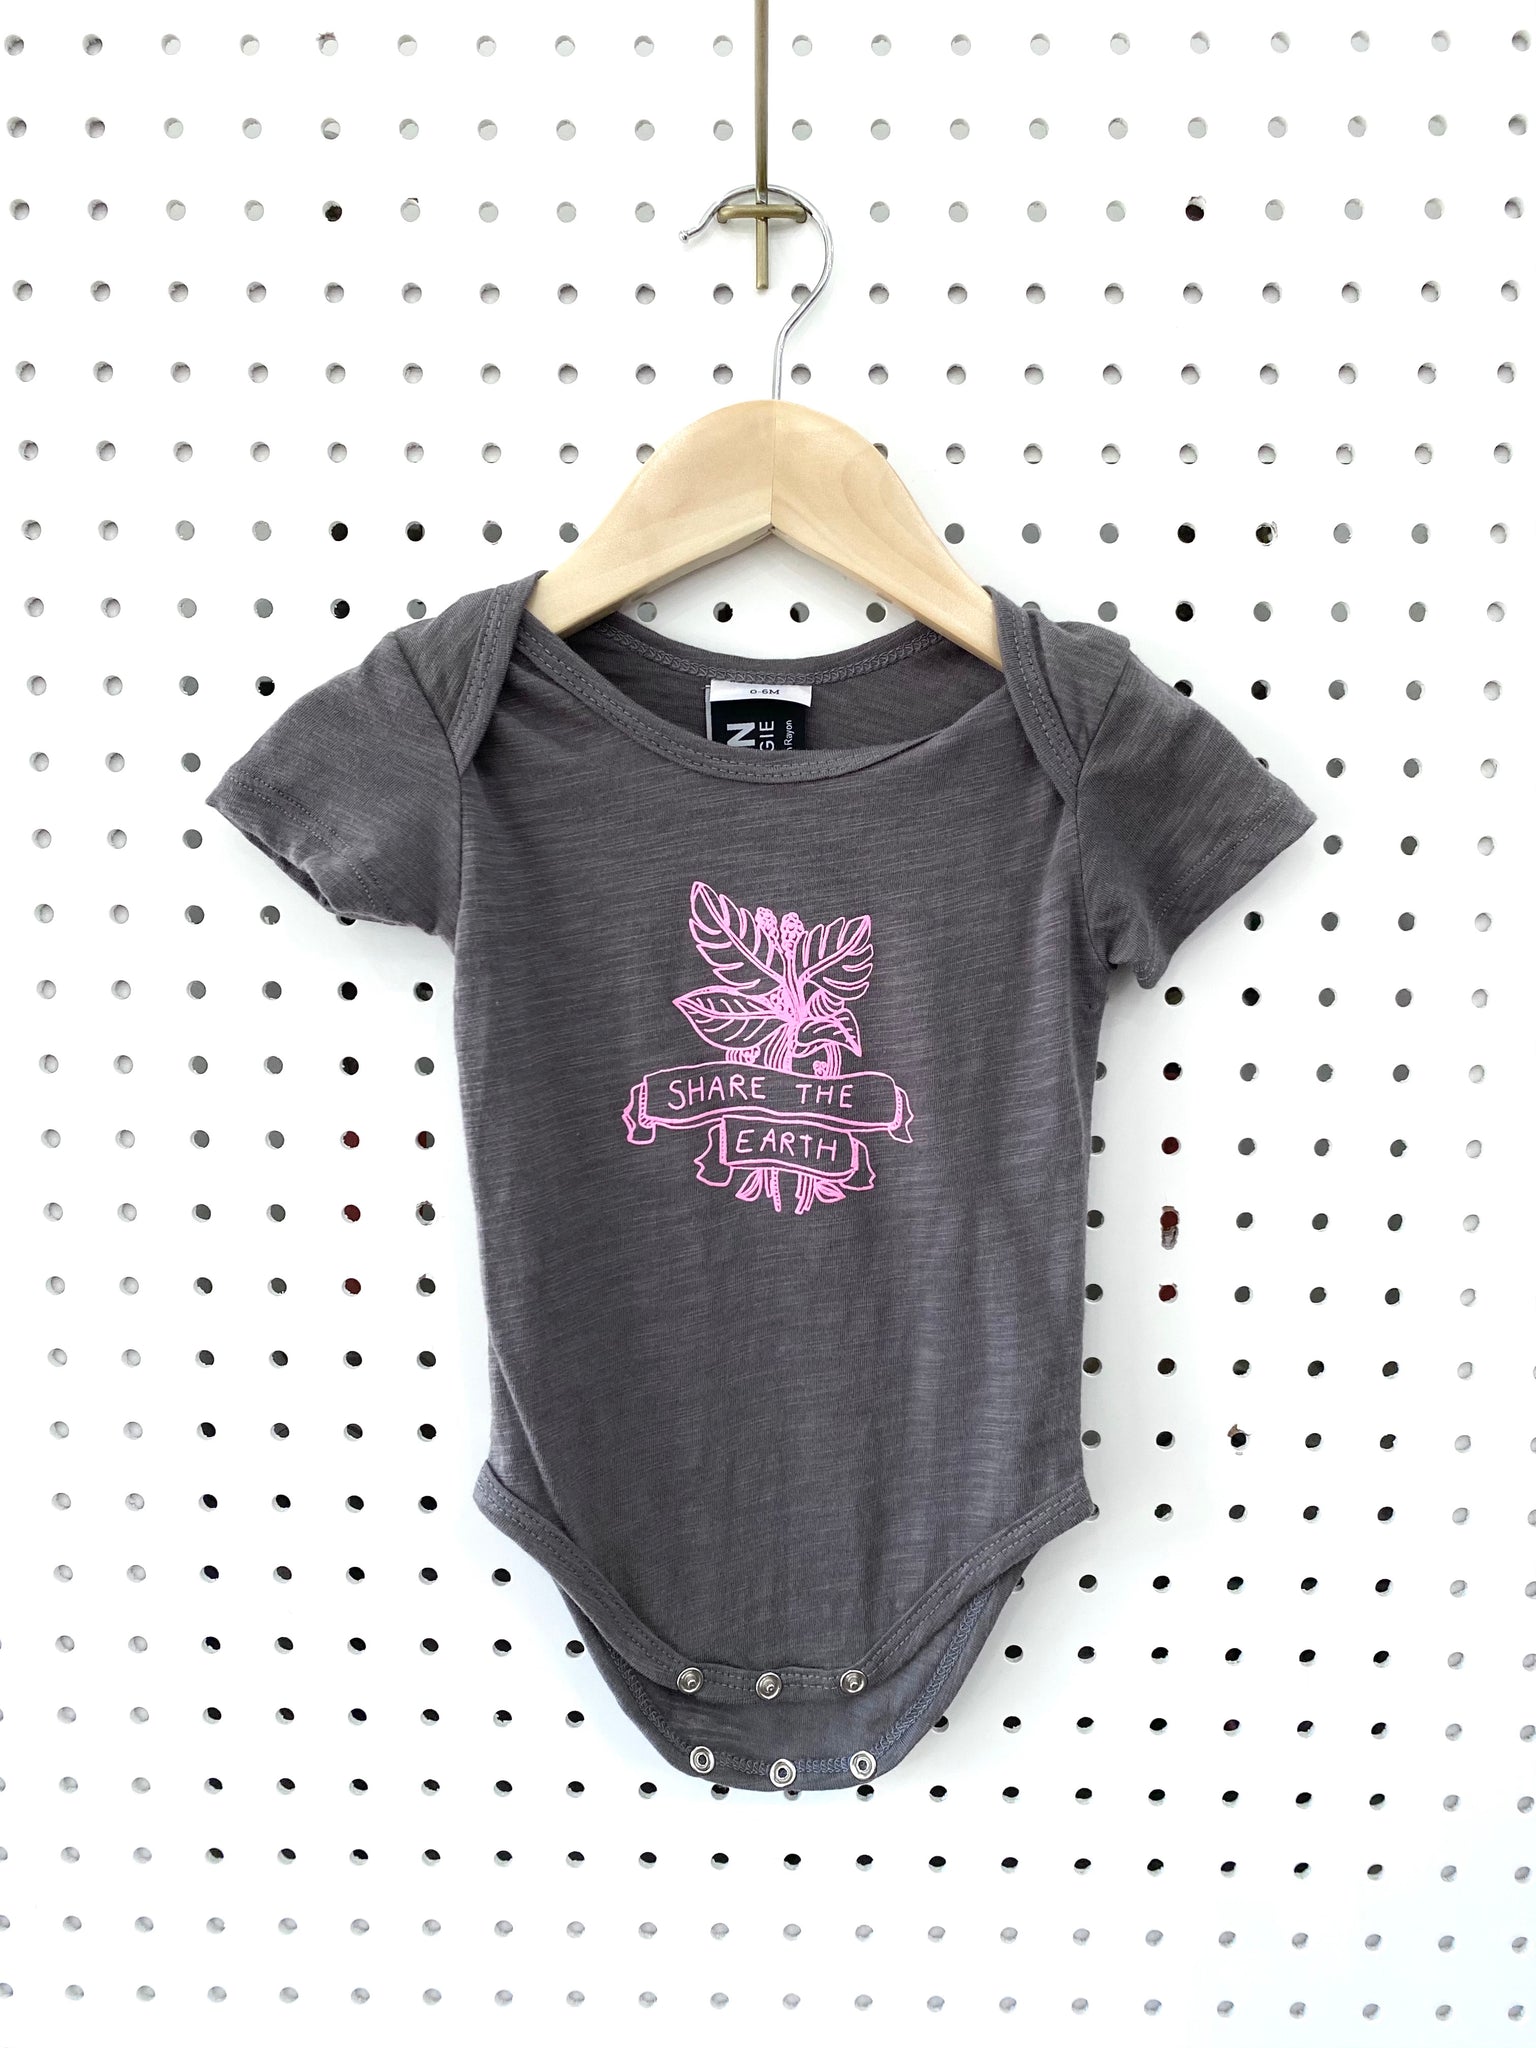 Share the Earth Baby Onesie